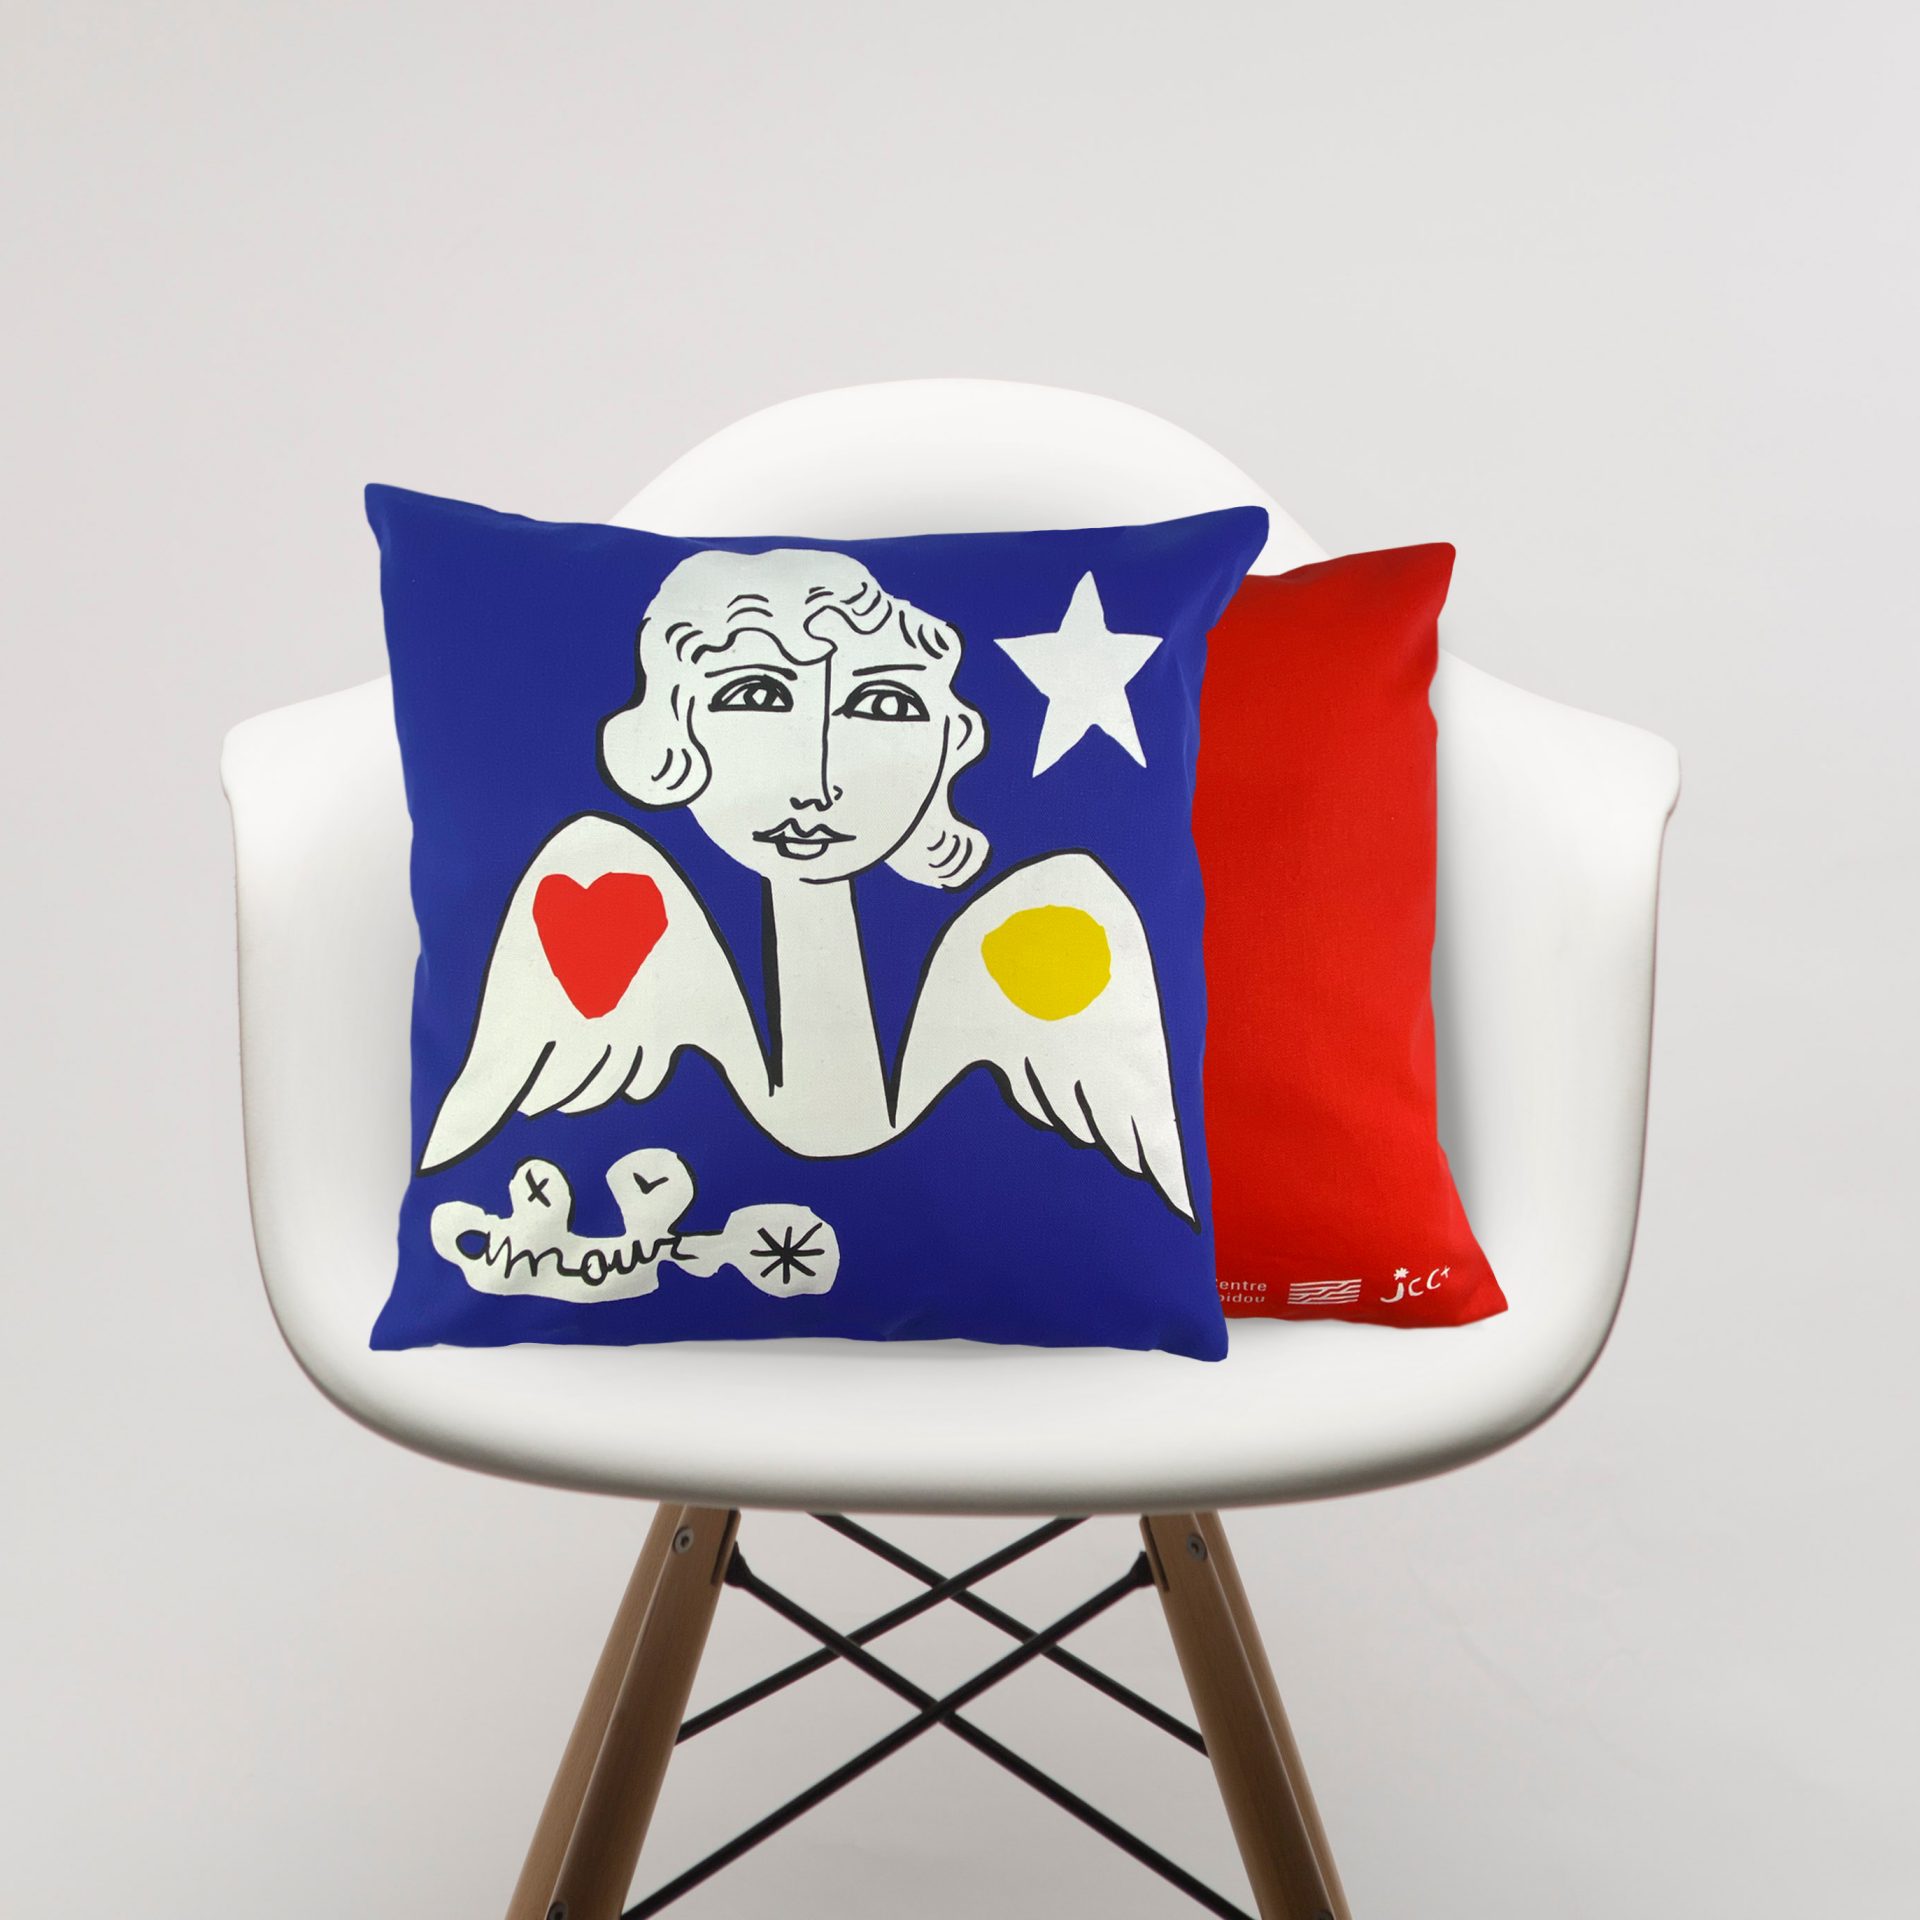 Screen printed cushions availabel in fast lead times for cultural retail by Paul Bristow